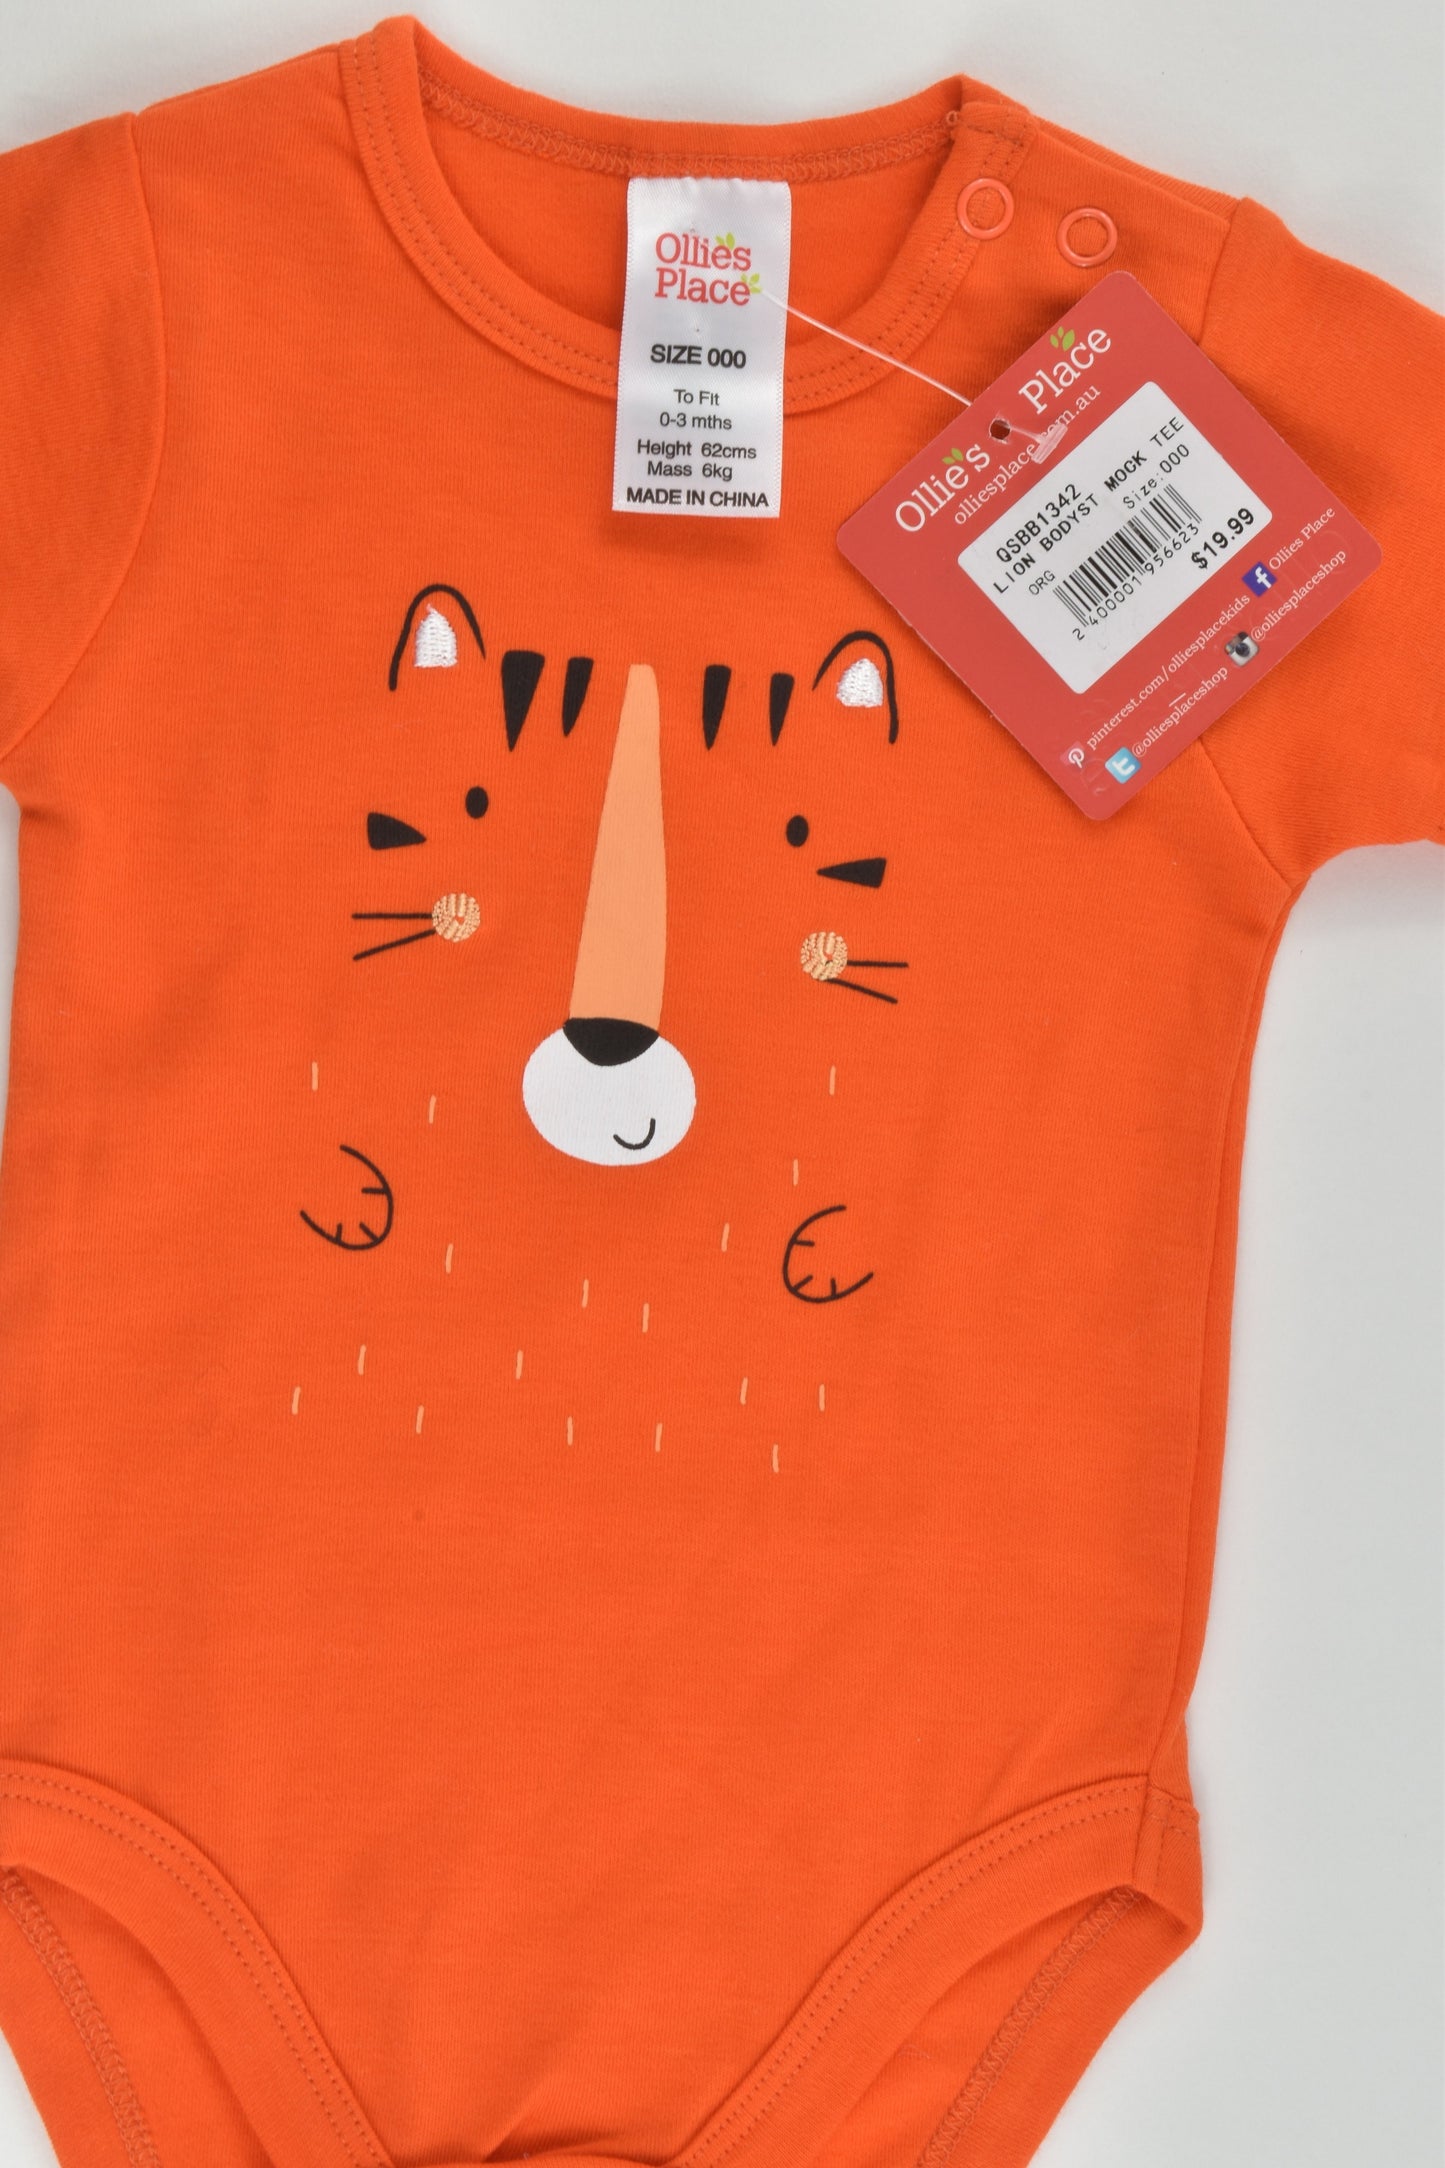 NEW Ollie's Place Size 000 (0-3 months) Tiger Bodysuit